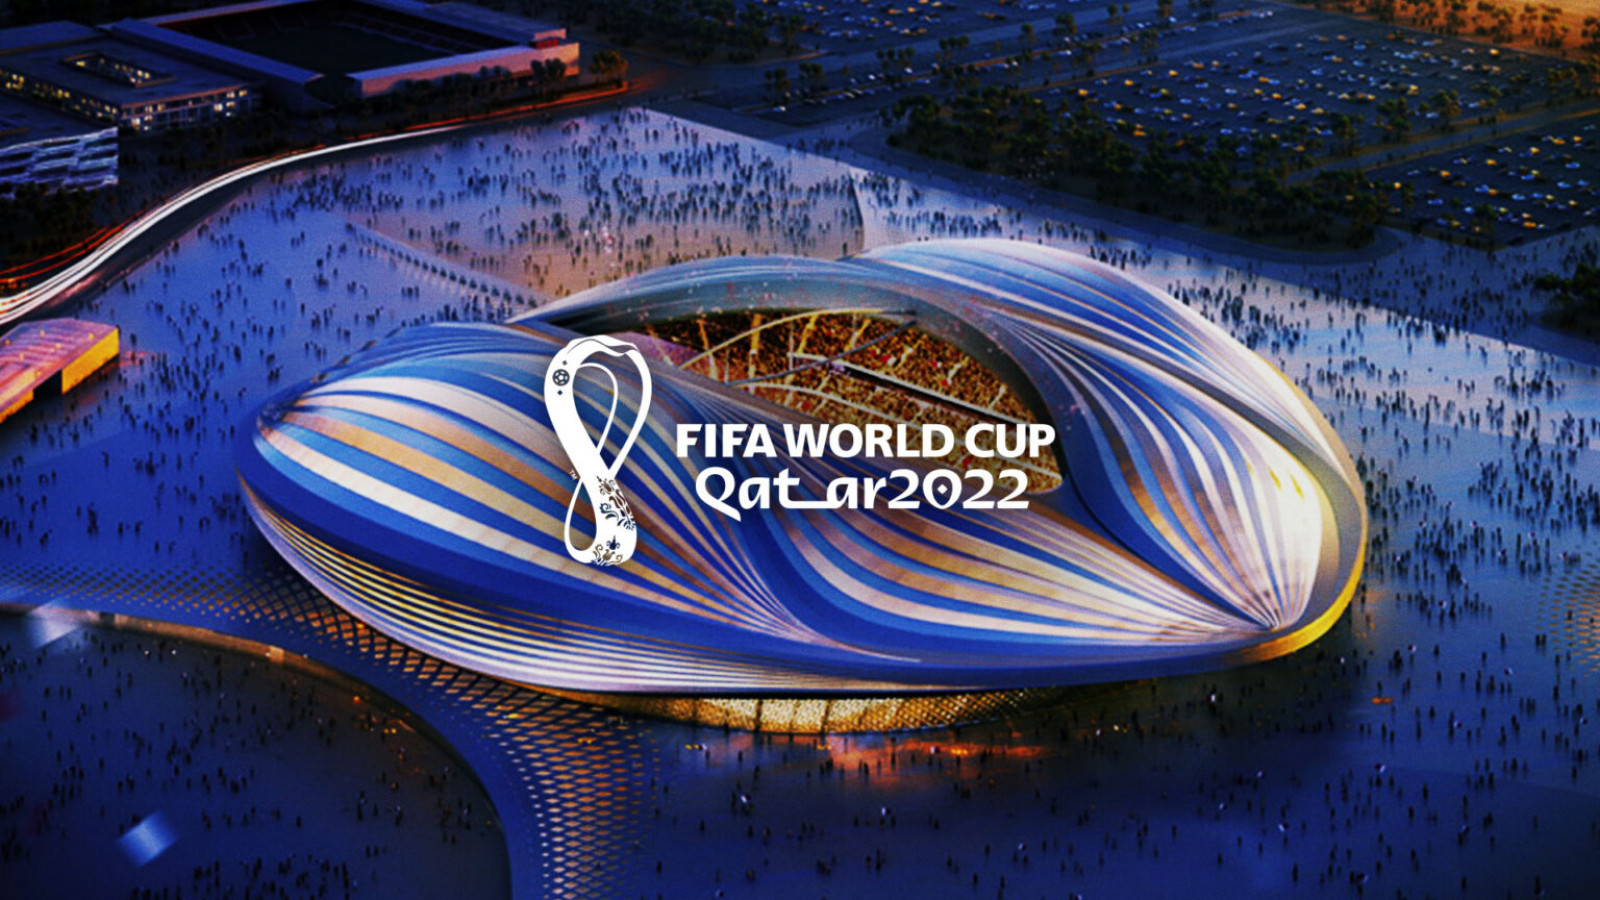 Fox brings its FIFA World Cup 2022 coverage into the streaming era